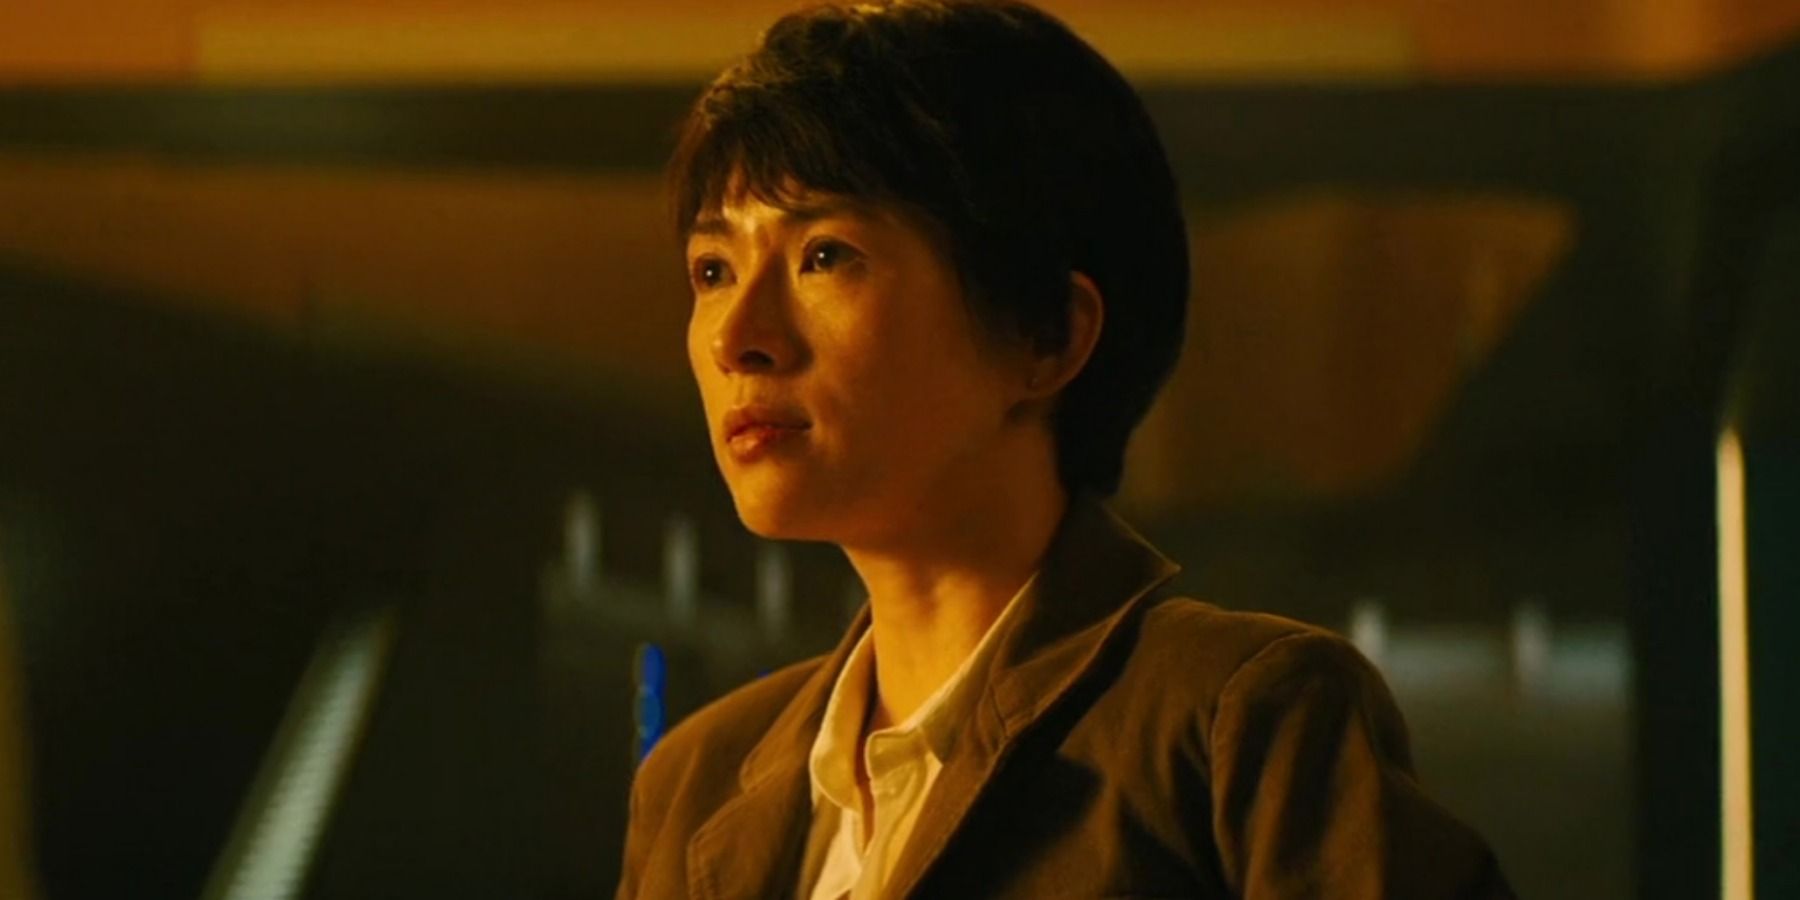 Ziyi Zhang as Dr. Chen in Godzilla: King Of The Monsters